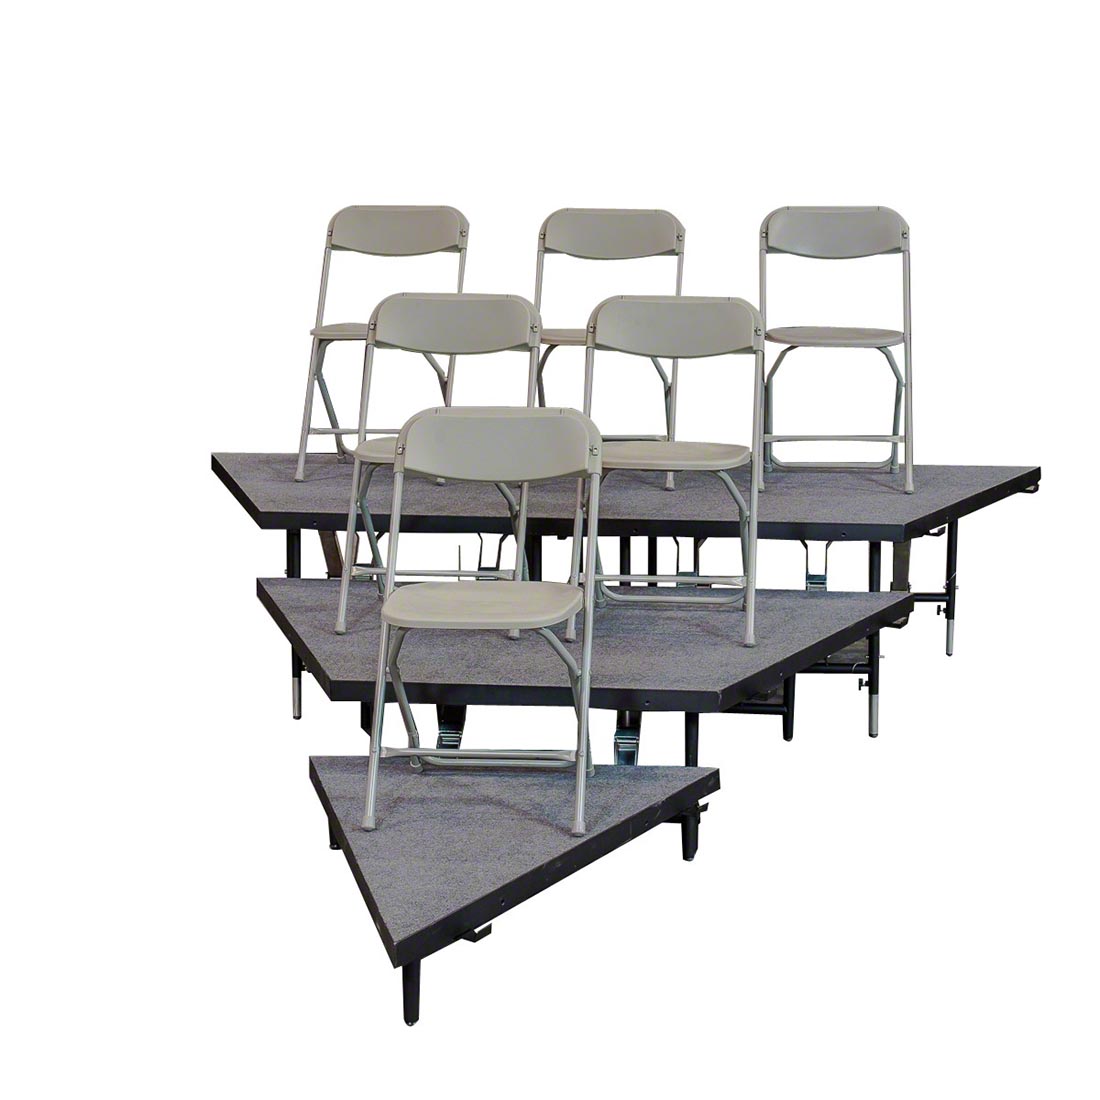 Staging 101 3-Tier 24' Seated Riser (Fits 36 Chairs)